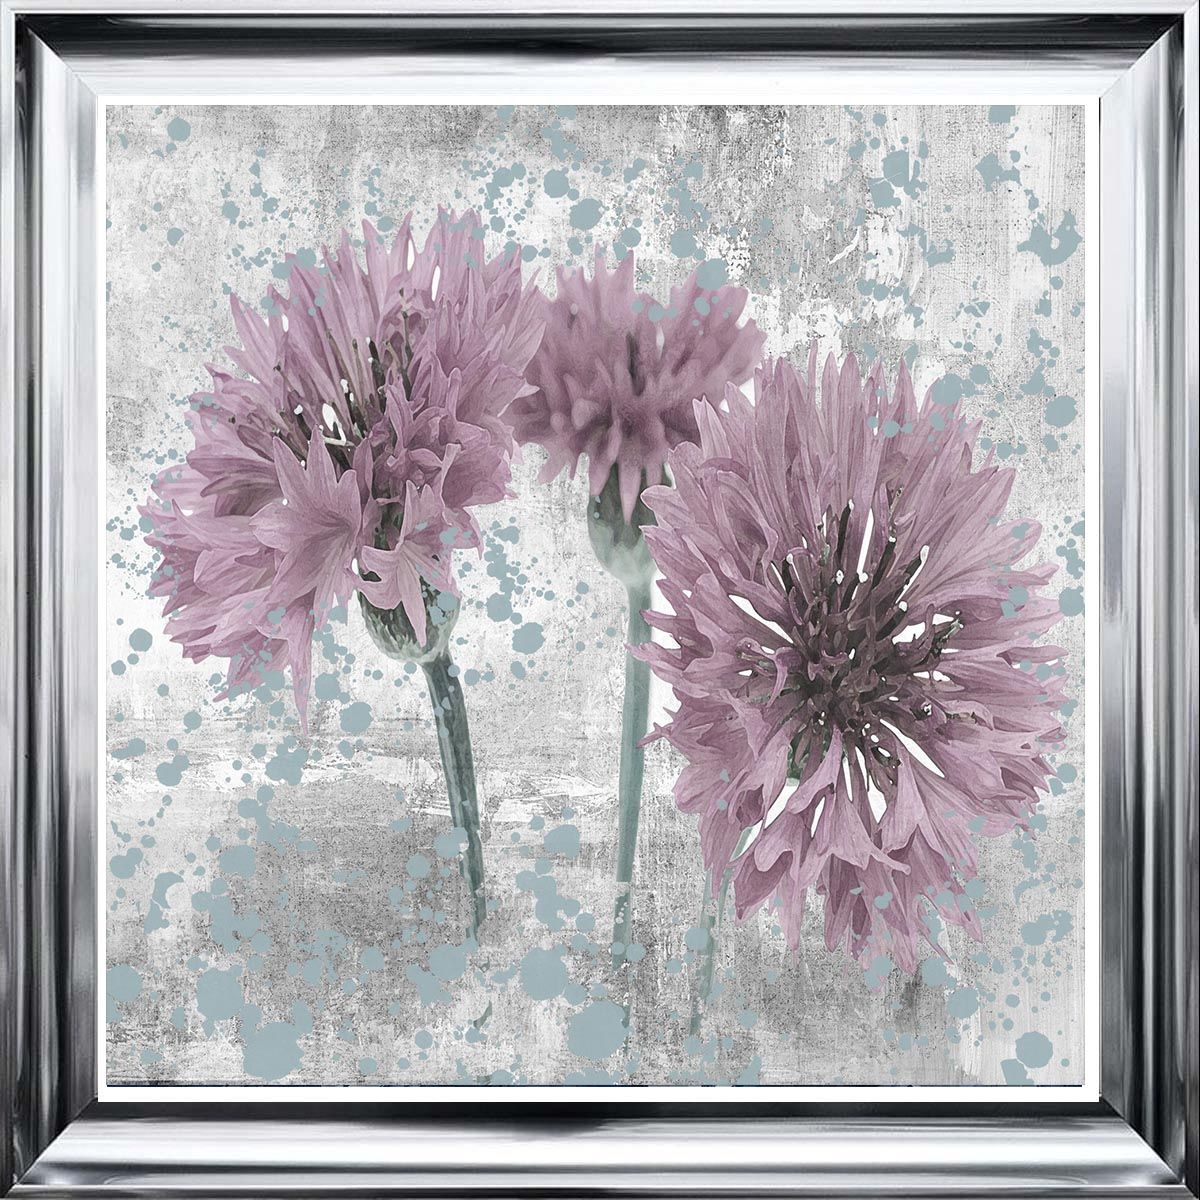 Blush Pink Floral Resin Embellished Framed Liquid Artsarah Clayton |  Blush Pink Floral Abstract Framed Artworksarah Clayton With Regard To Liquid Wall Art (View 8 of 15)